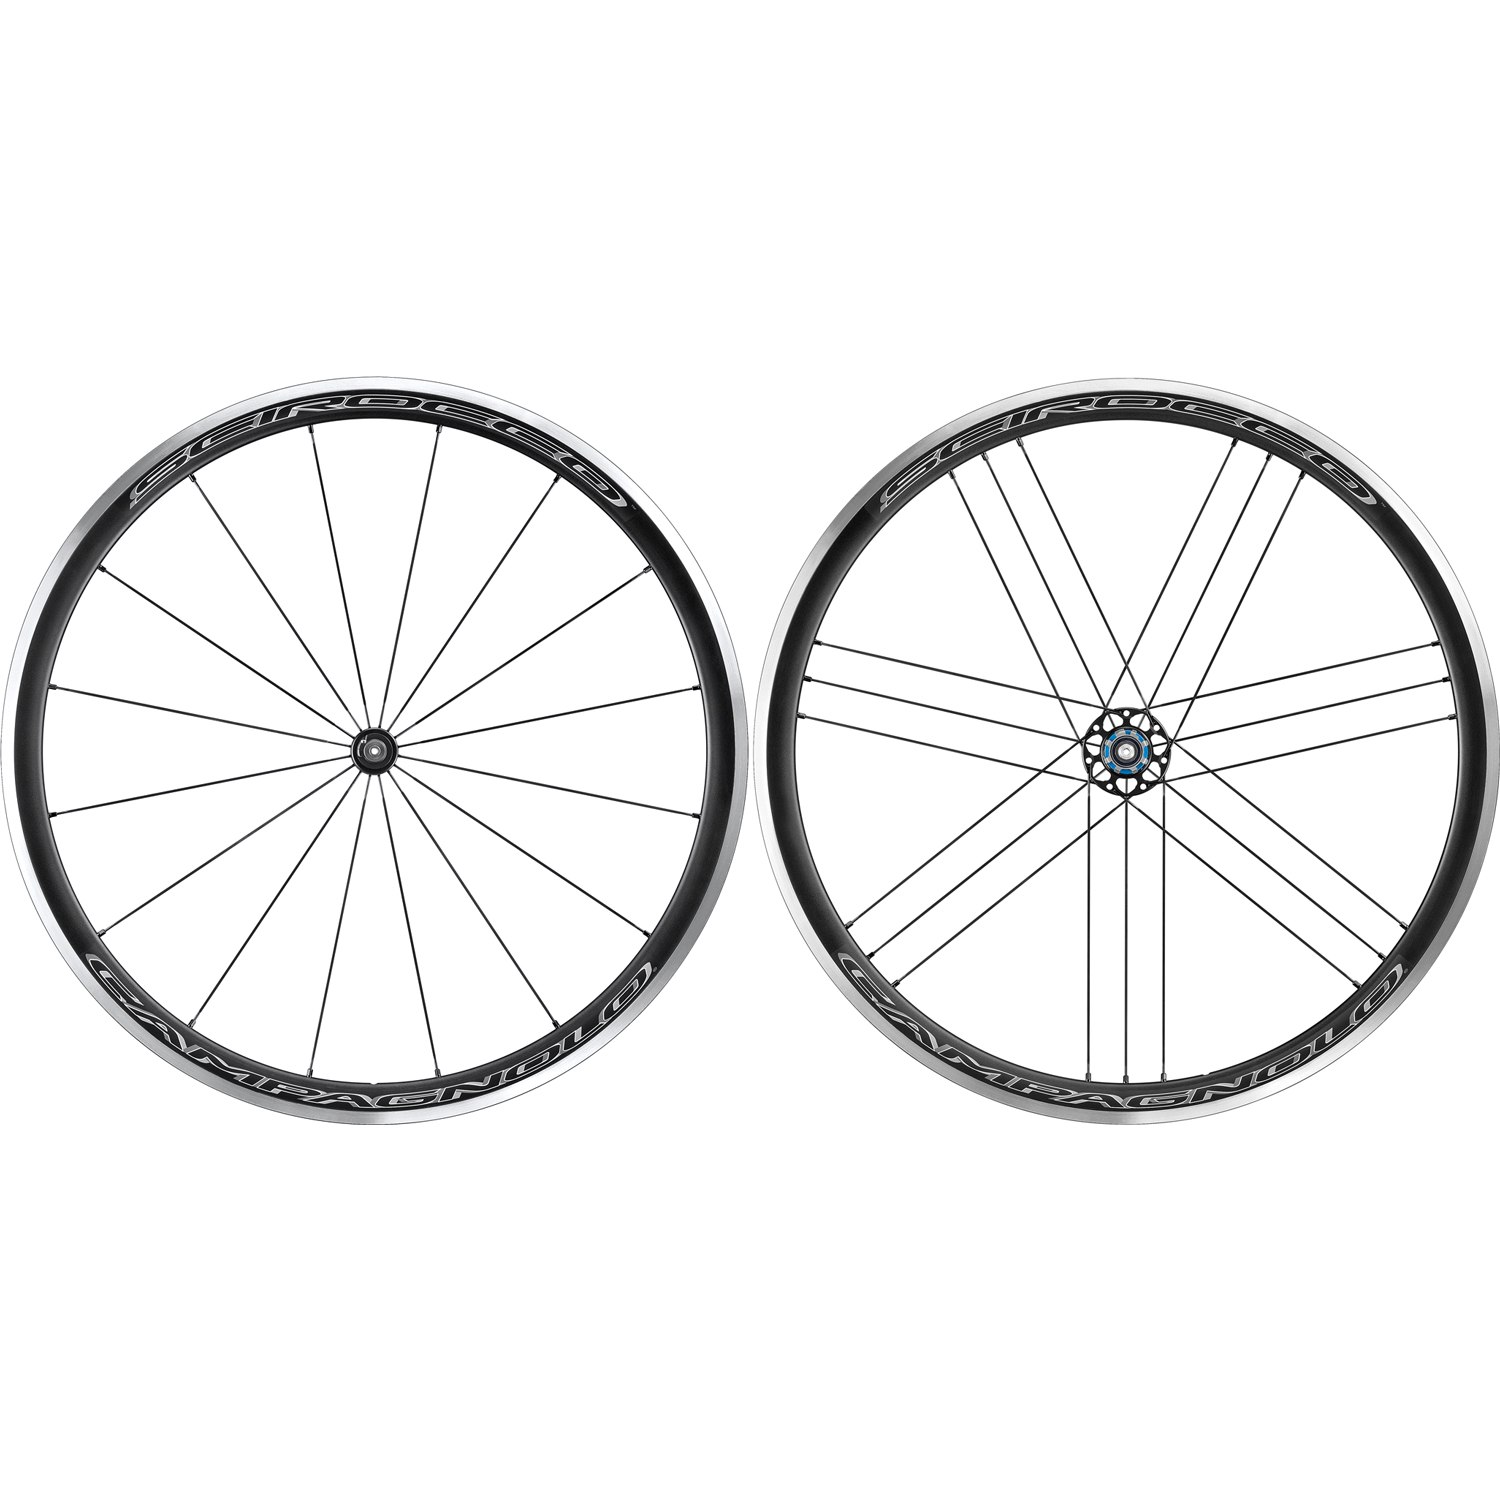 Picture of Campagnolo Scirocco C17 - 28 Inches Wheelset Clincher - black